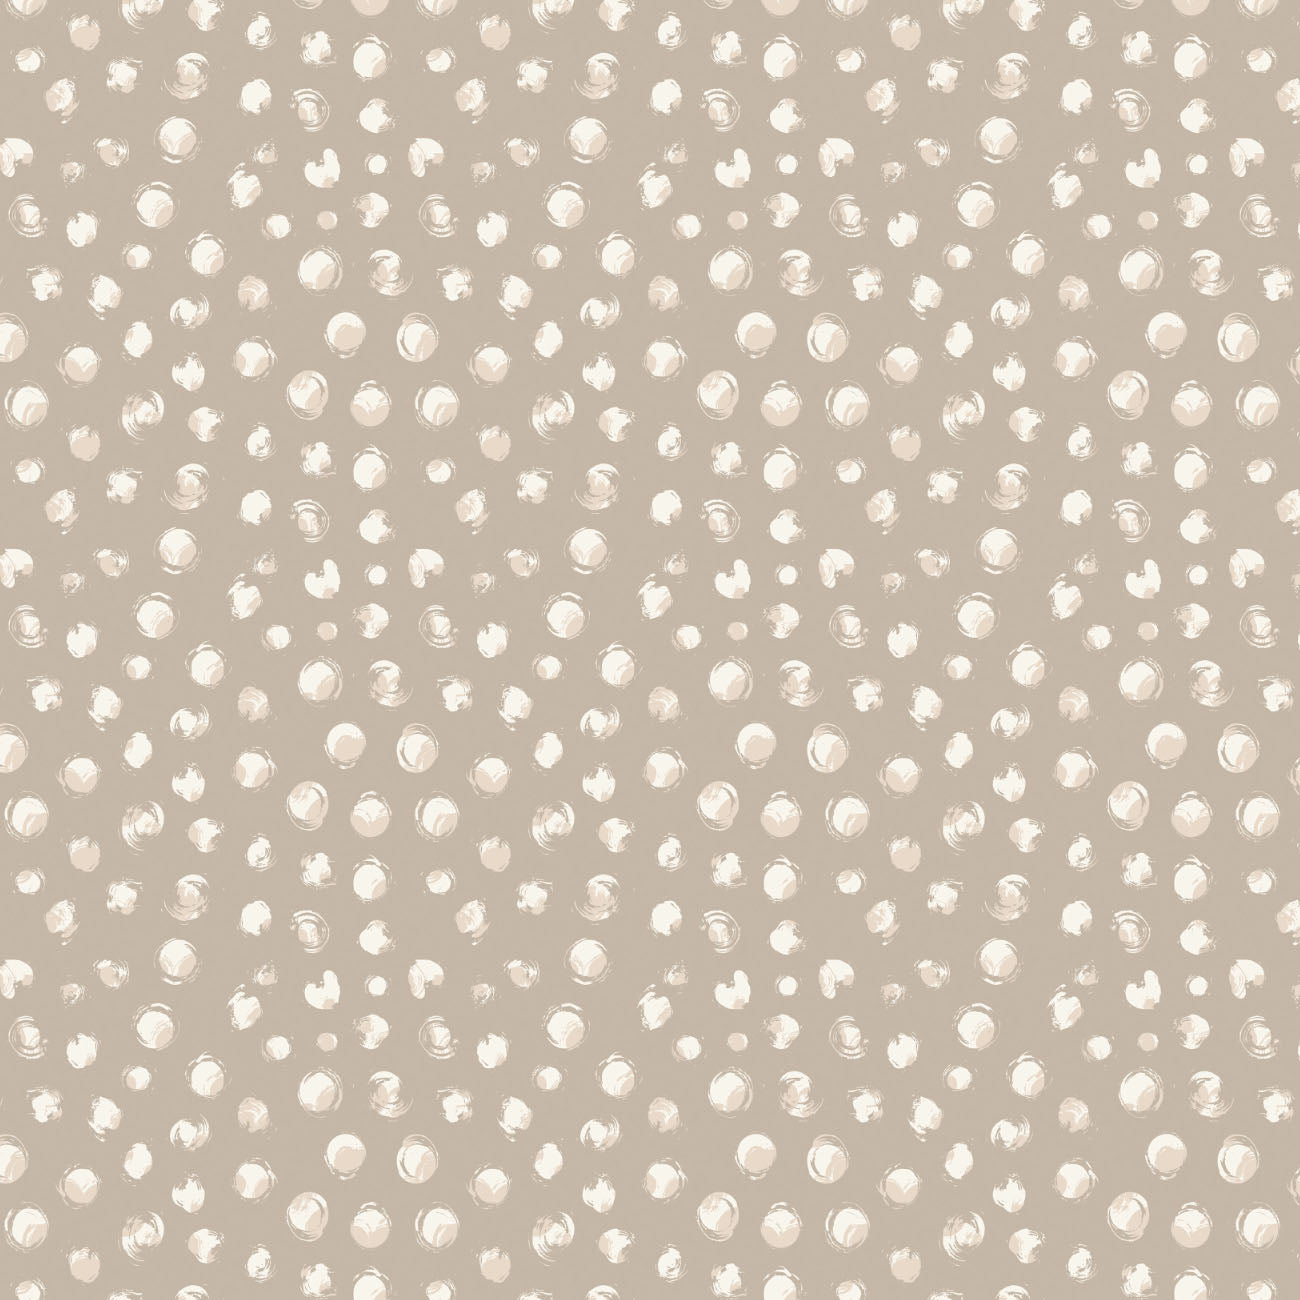 Sweet Lullaby Collection - Brushstrokes Dots - Beige - Cotton 58230305-01